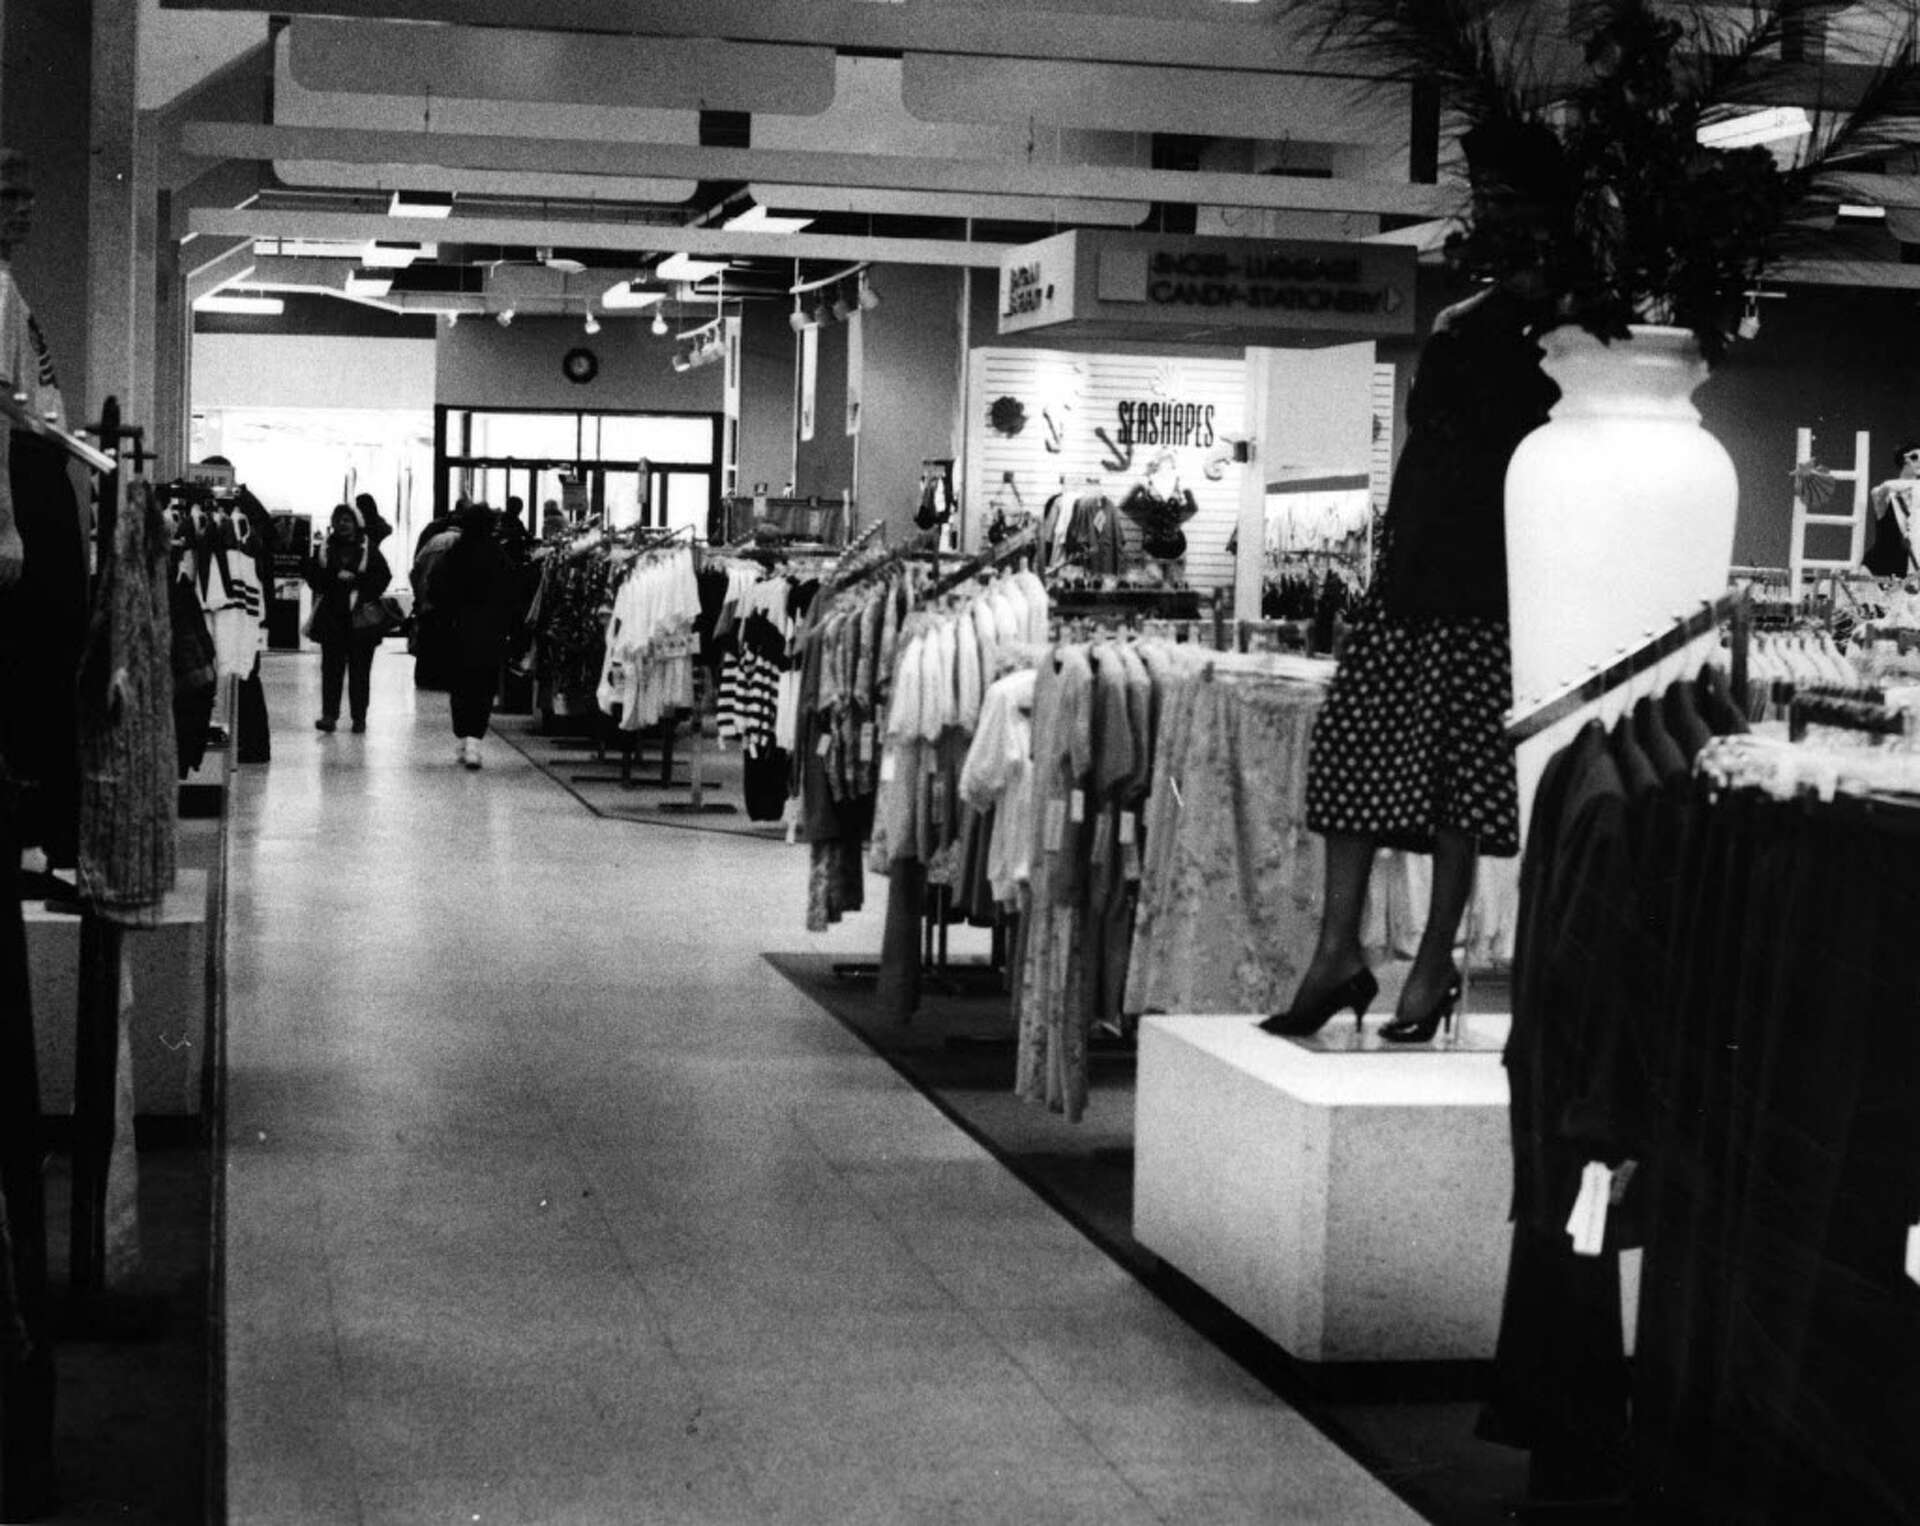 Gone but not forgotten: Stores and other landmarks we miss